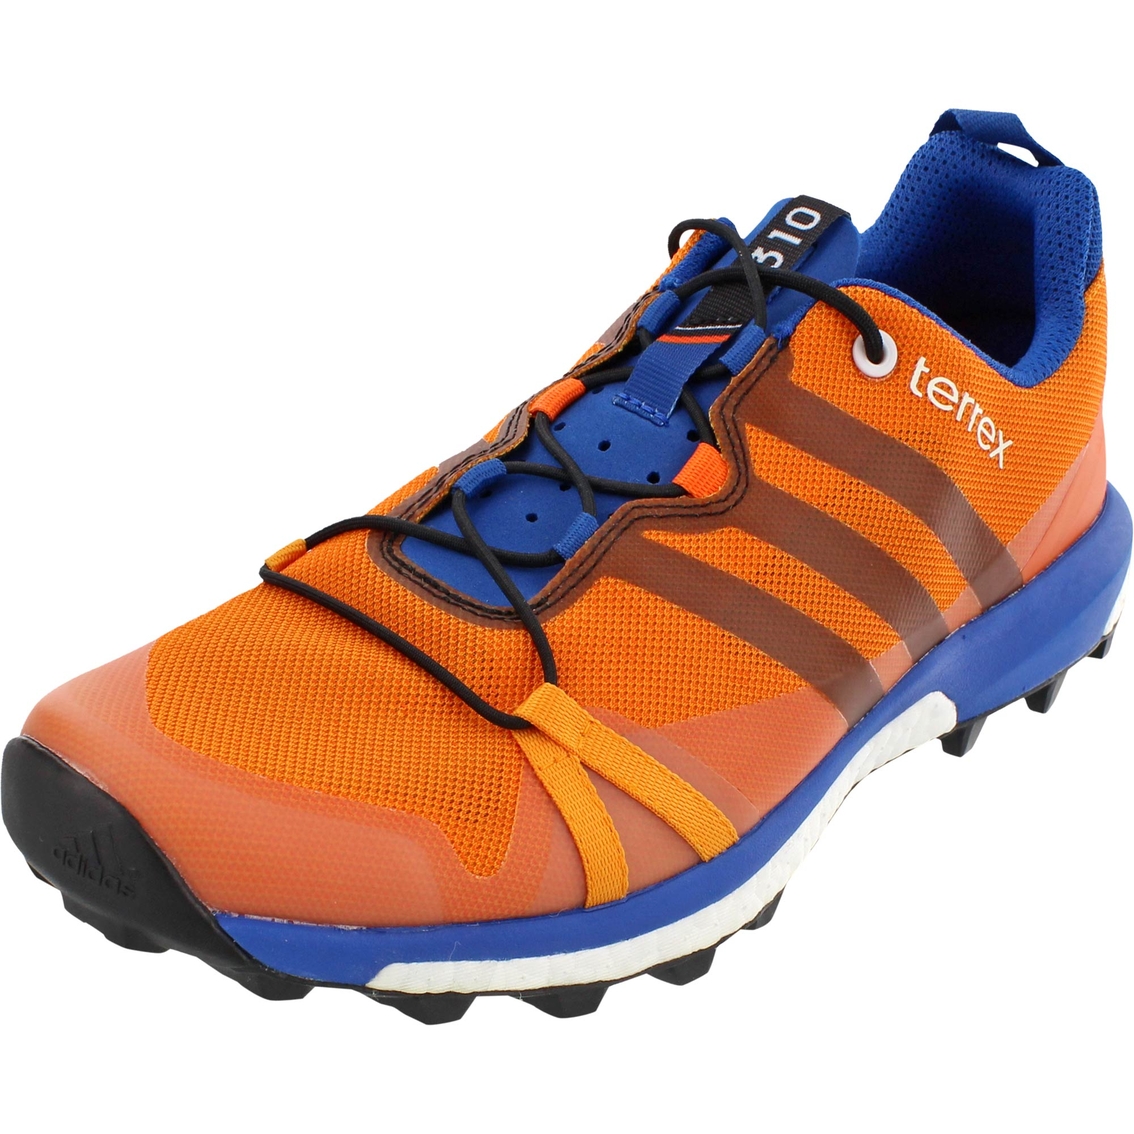 Adidas Outdoor Men's Terrex Agravic Trail Shoes | Hiking & Trail ...